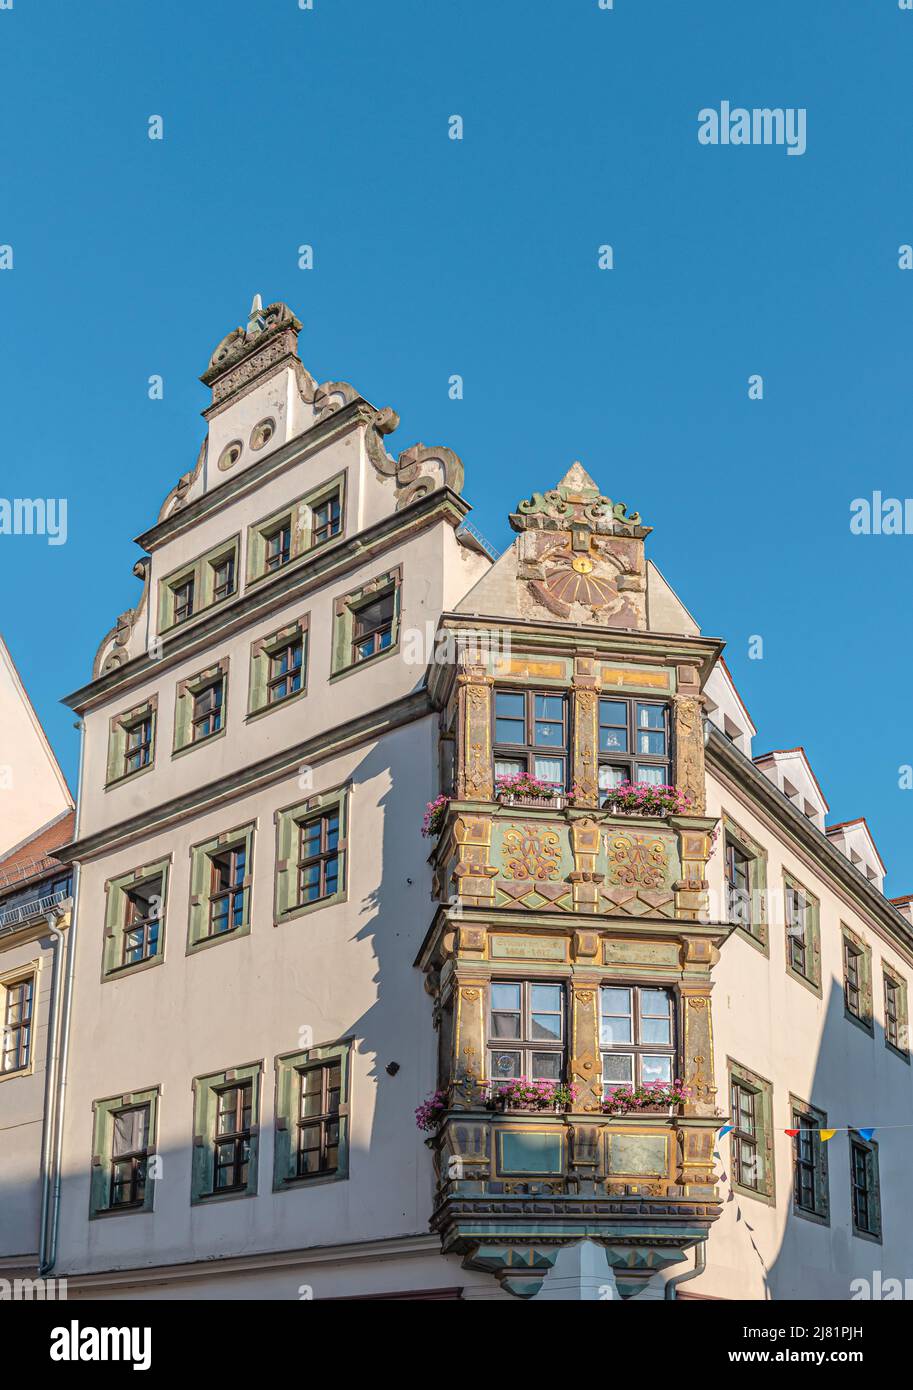 The 'Schöne-Erker-Haus' built in 1616 in the historic old town of Freiberg, Saxony, Germany Stock Photo